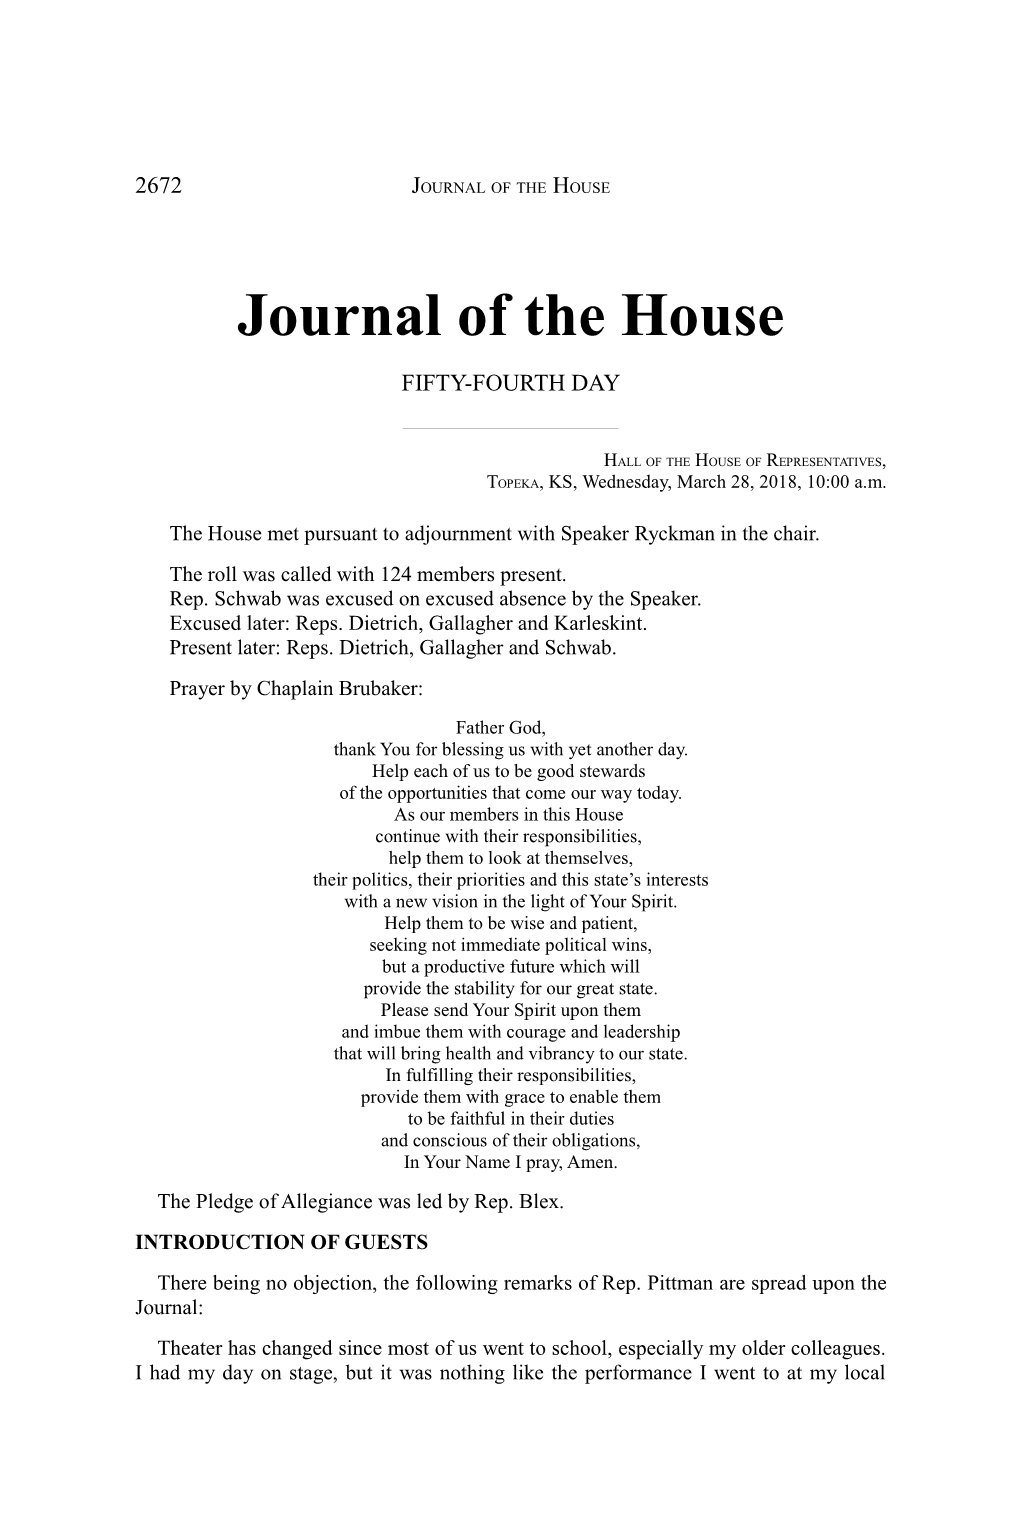 Journal of the House